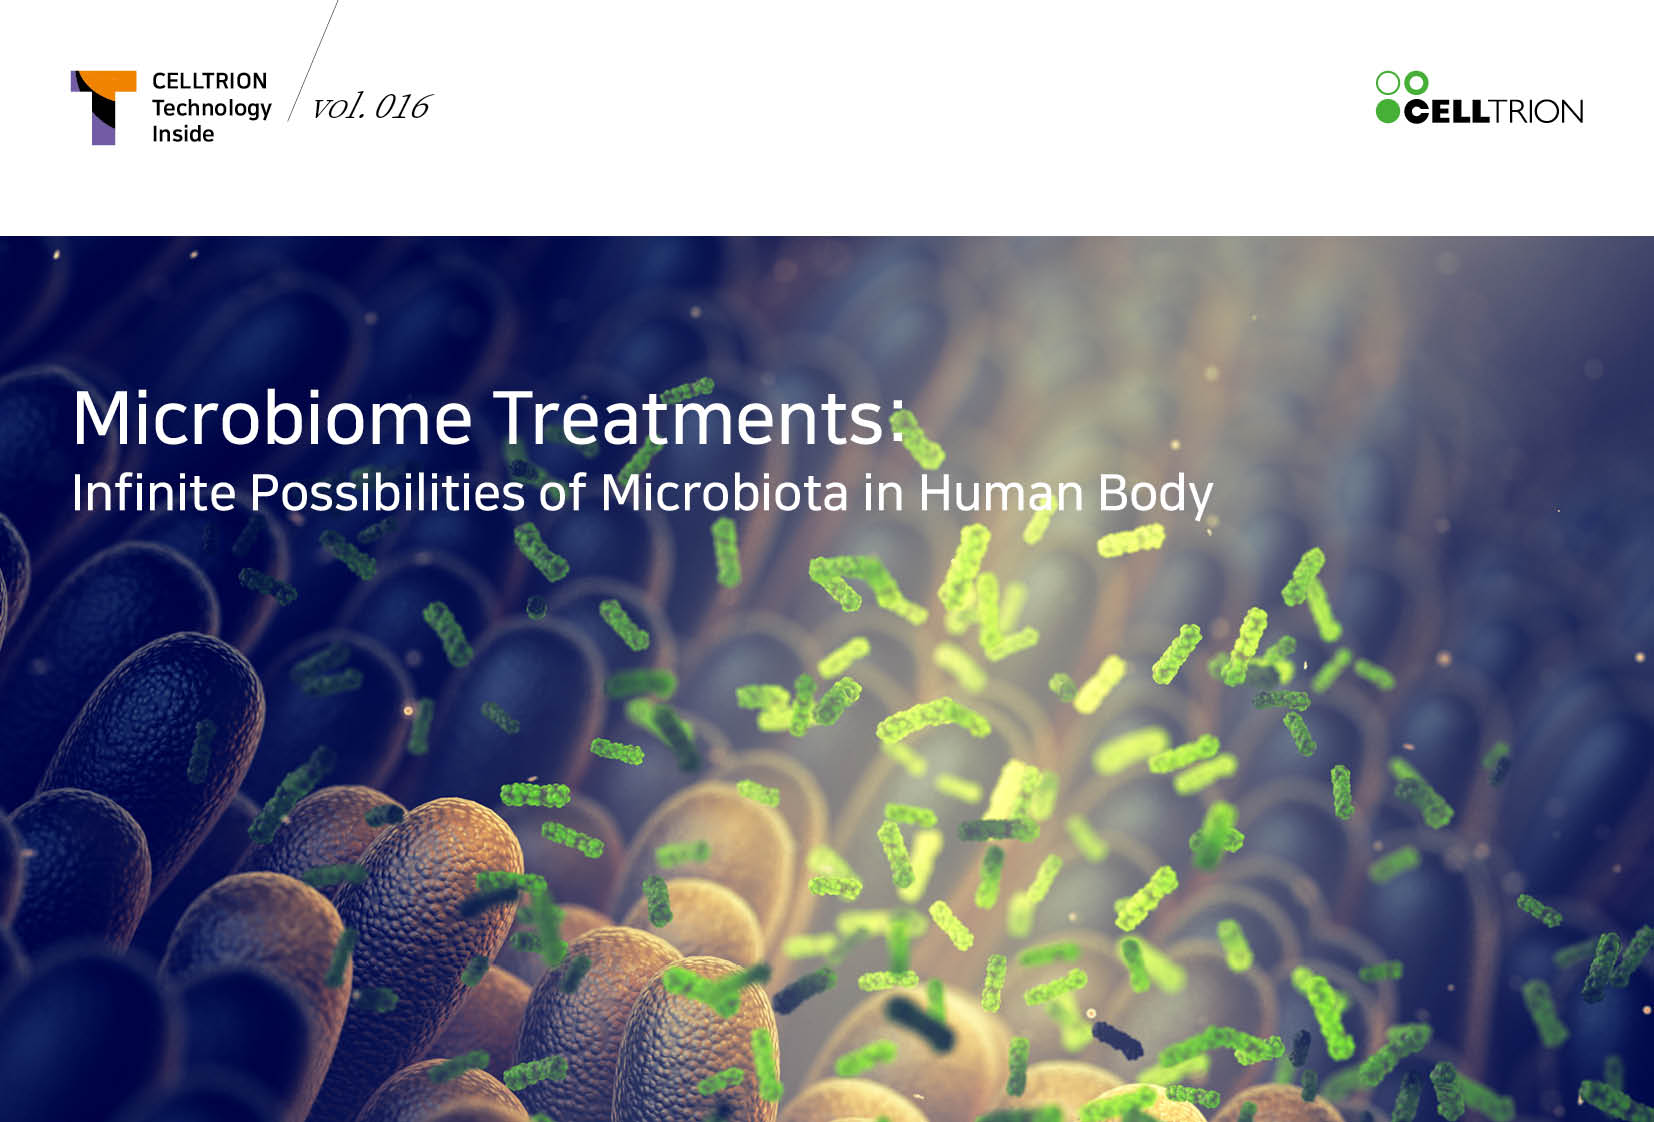 Microbiome treatments : Infinite possibilities of microbiota in human body